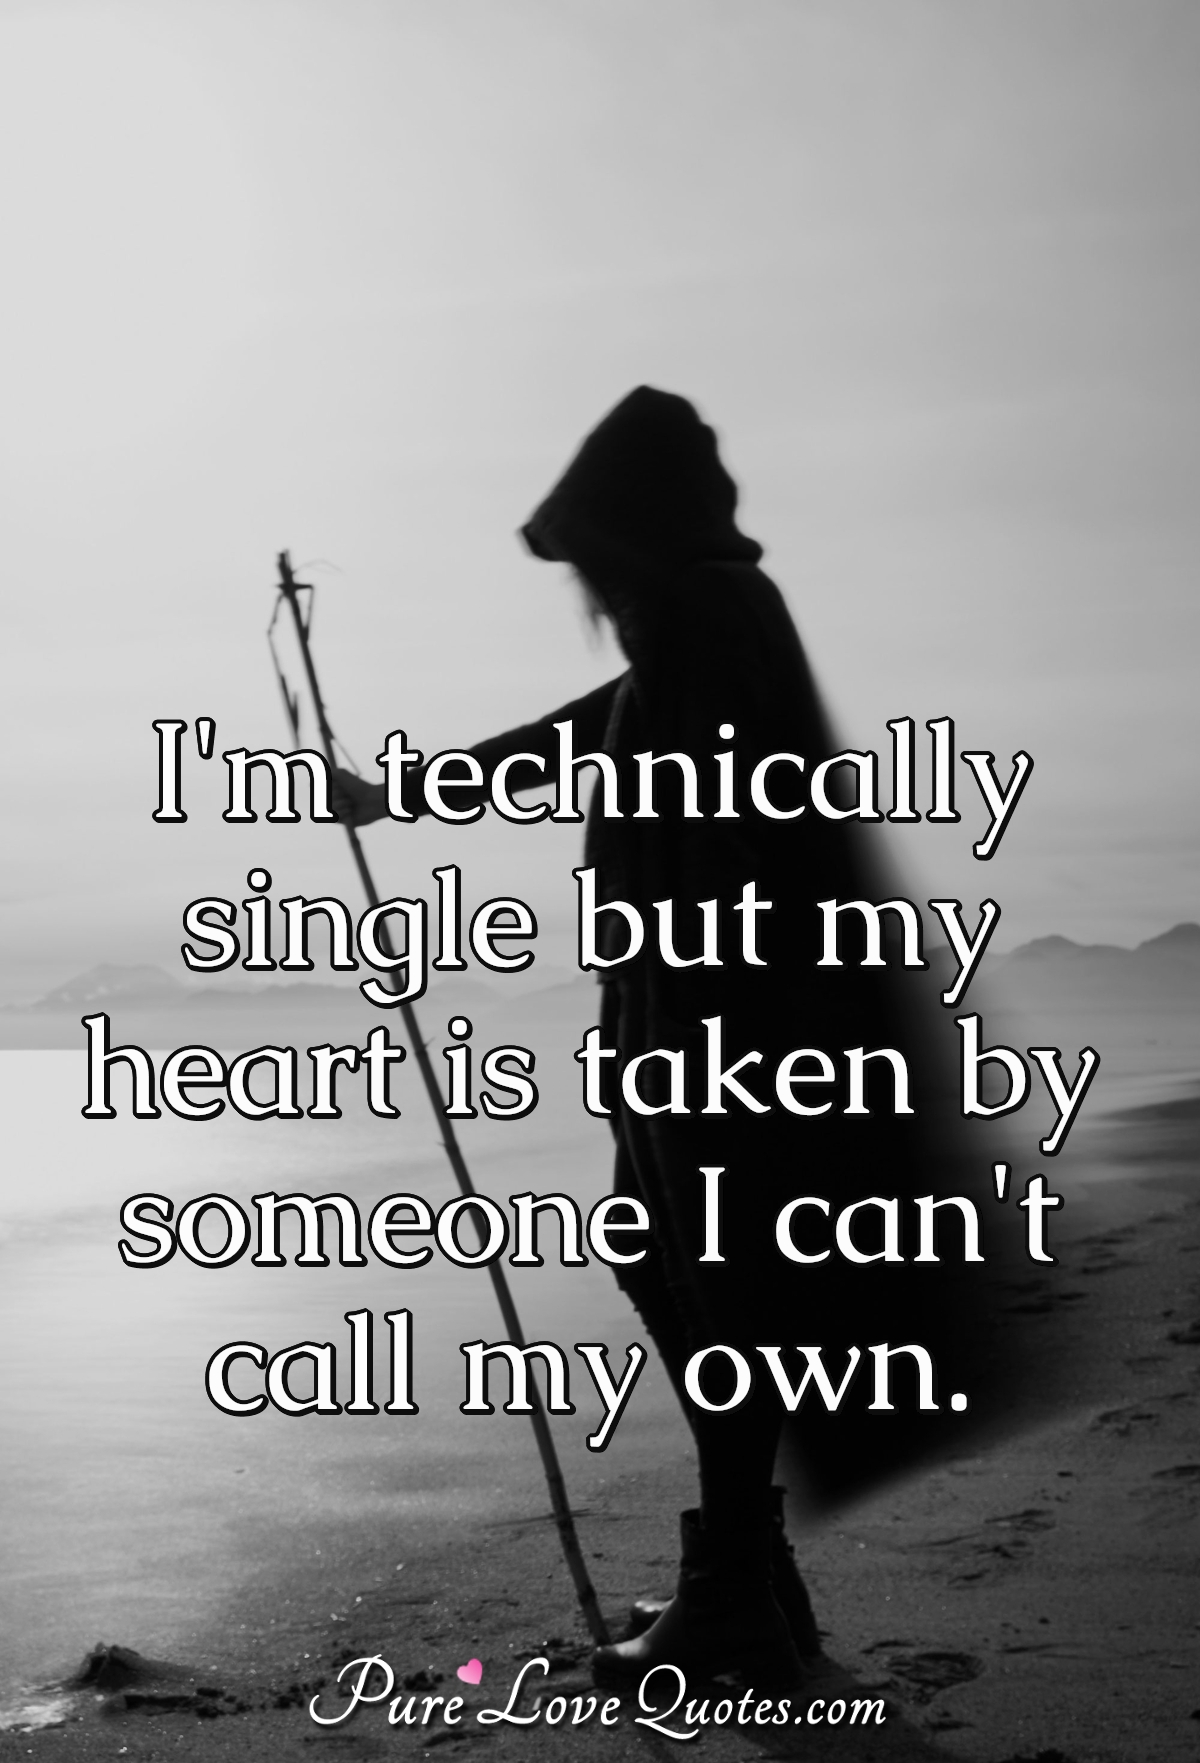 I'm technically single but my heart is taken by someone I can't call my own. - Anonymous